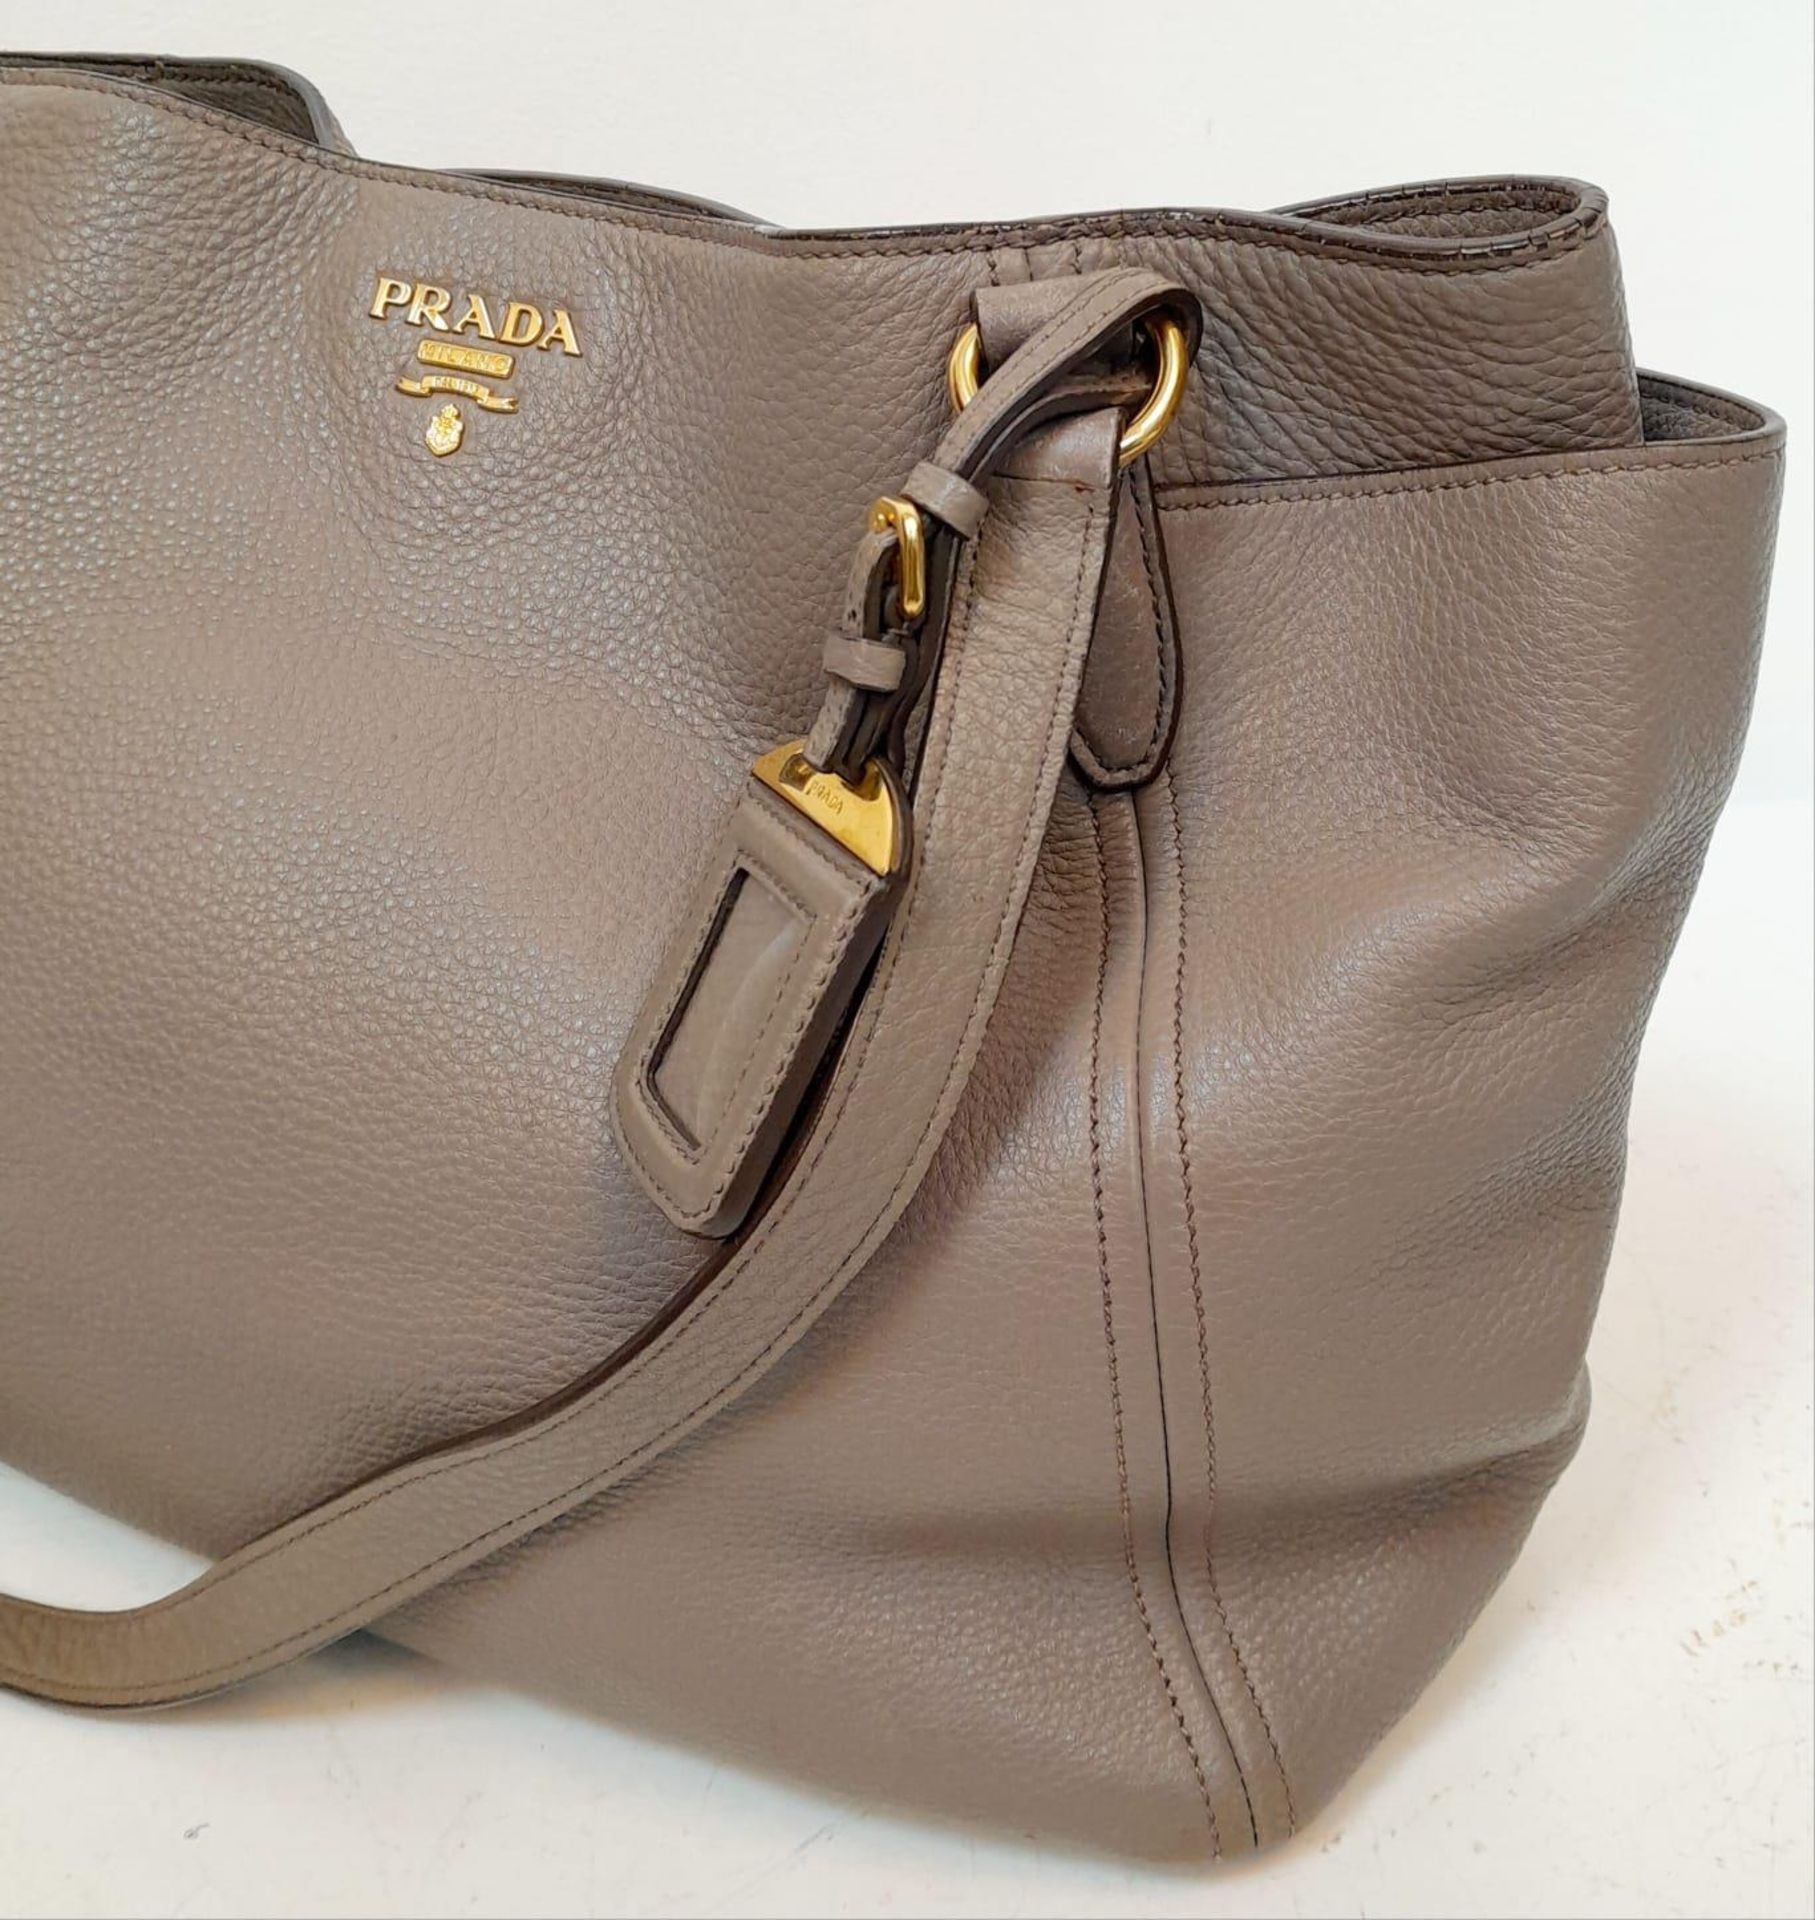 A Prada Grey Leather Shoulder Bag. Textured leather exterior with gold tone hardware. Textile and - Image 2 of 9